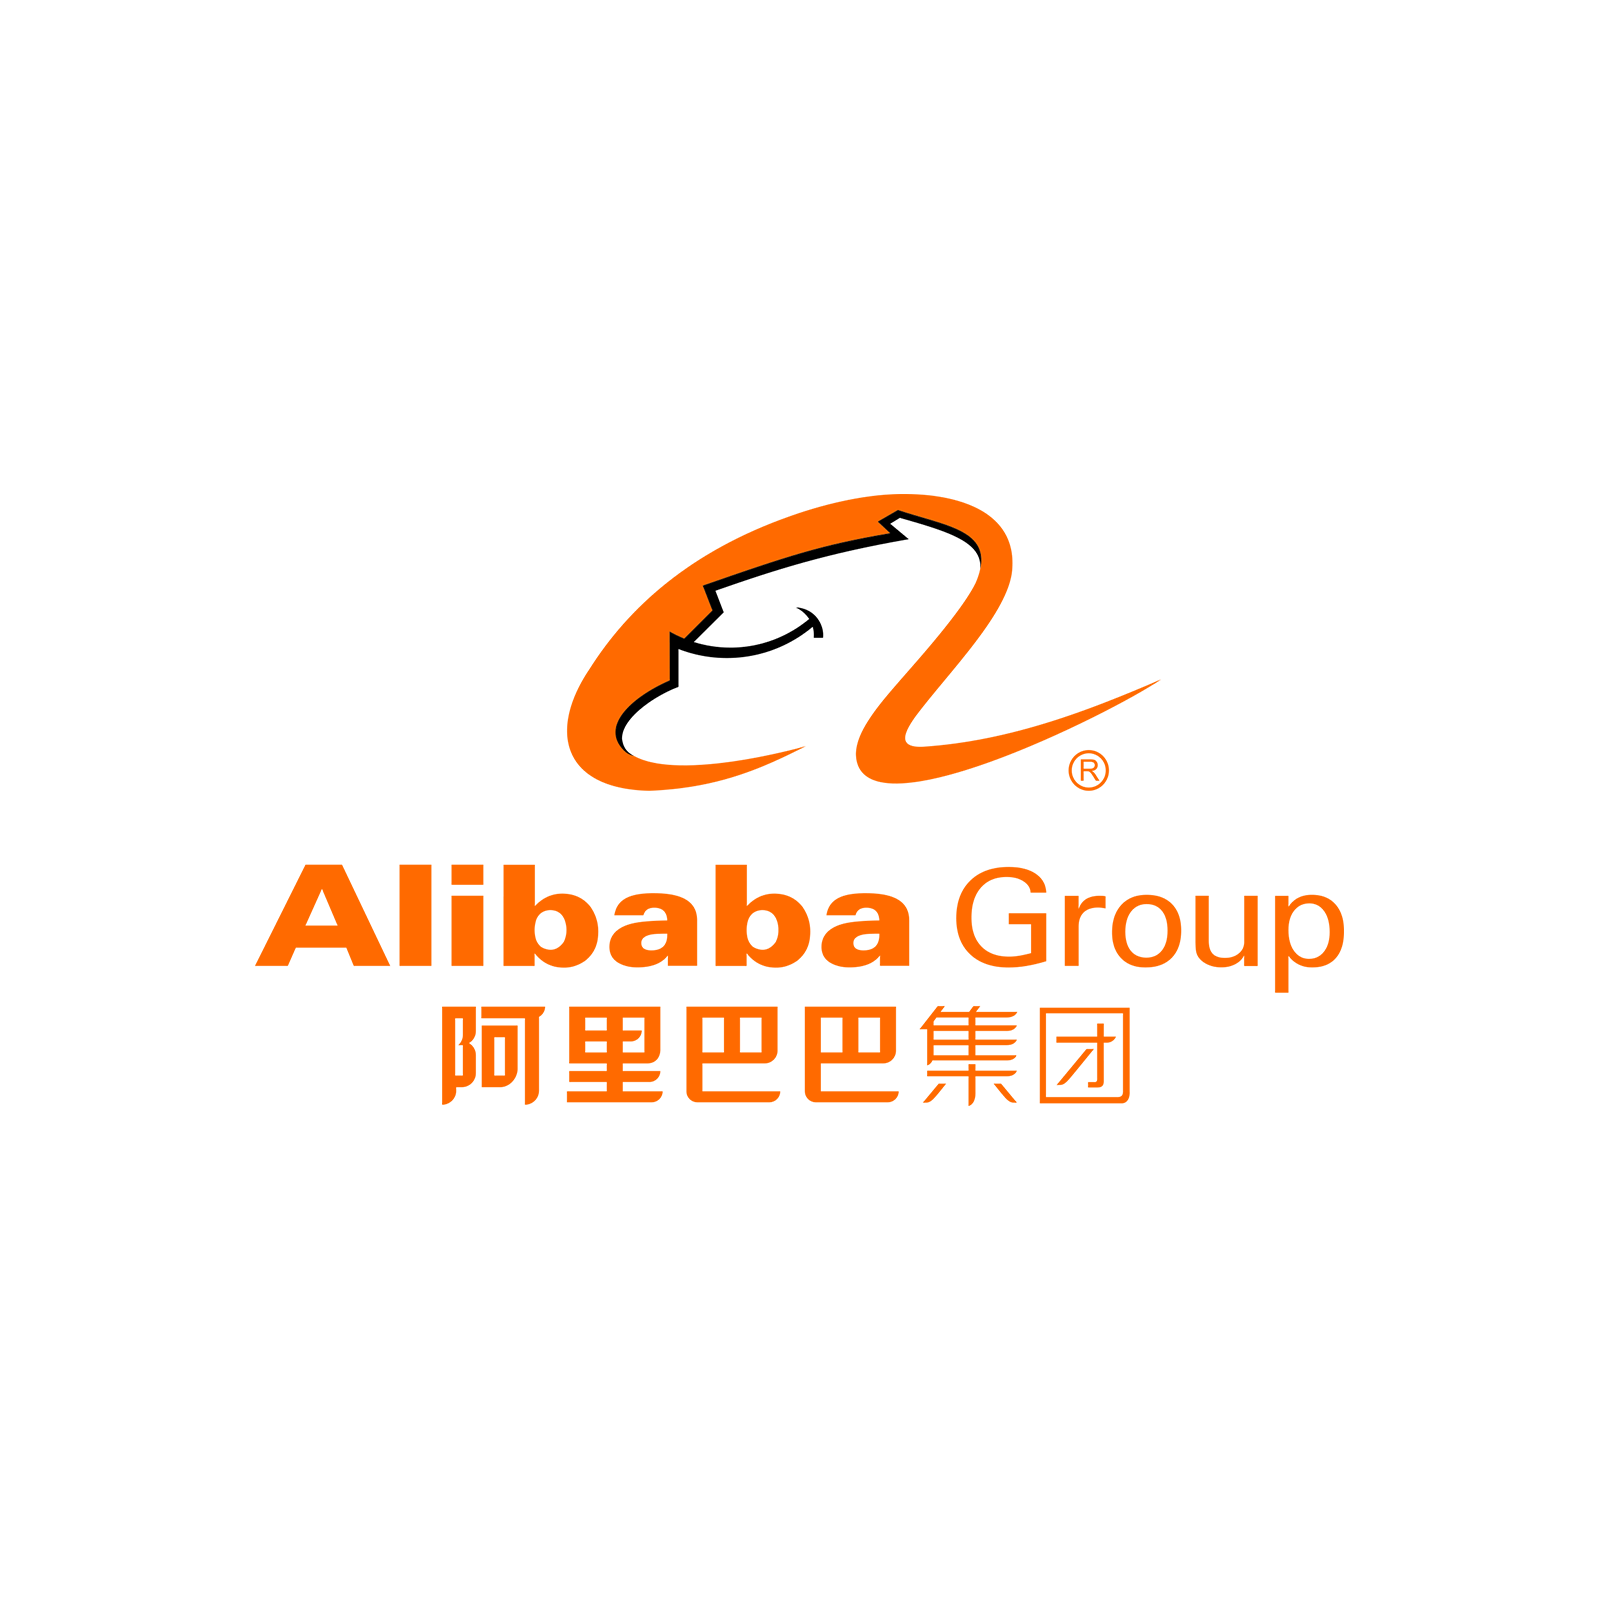 Alibaba Security Group